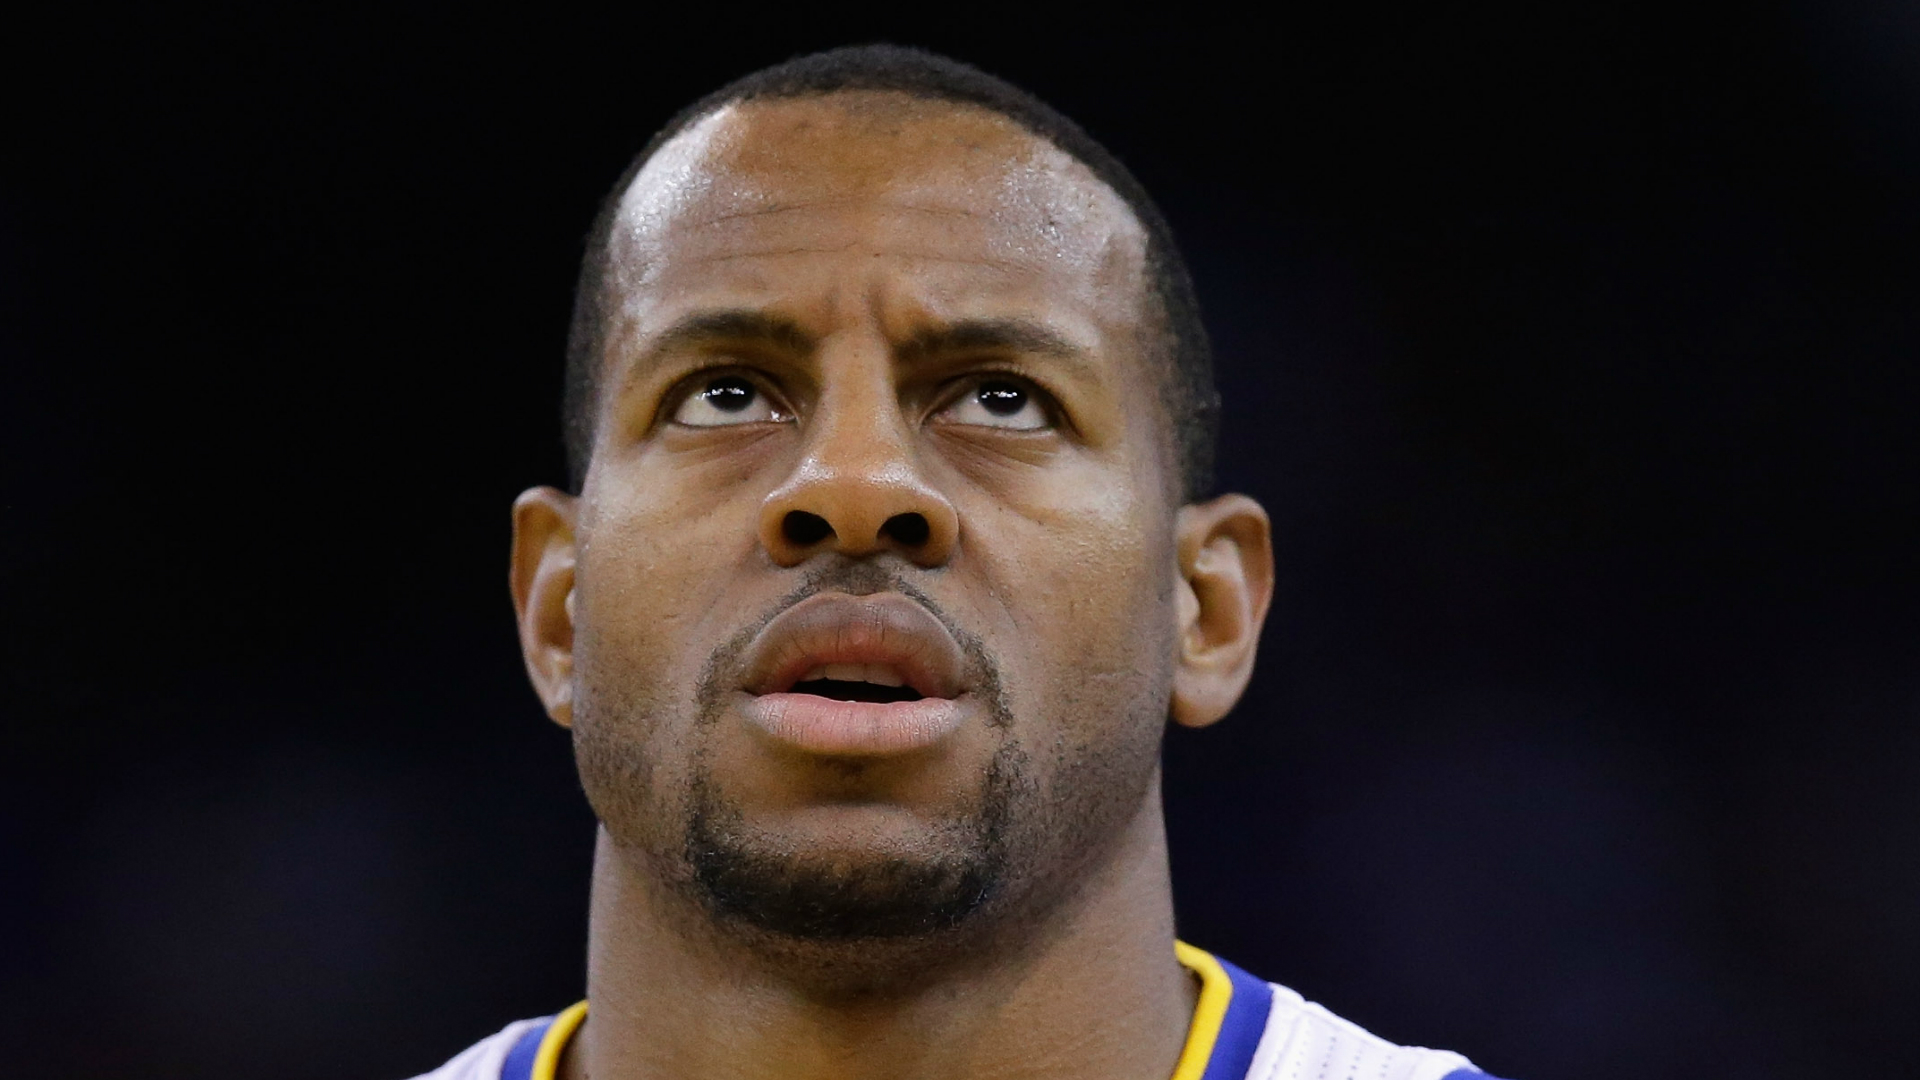 Andre Iguodala brings the sass on Twitter about being traded | NBA | Sporting News1920 x 1080